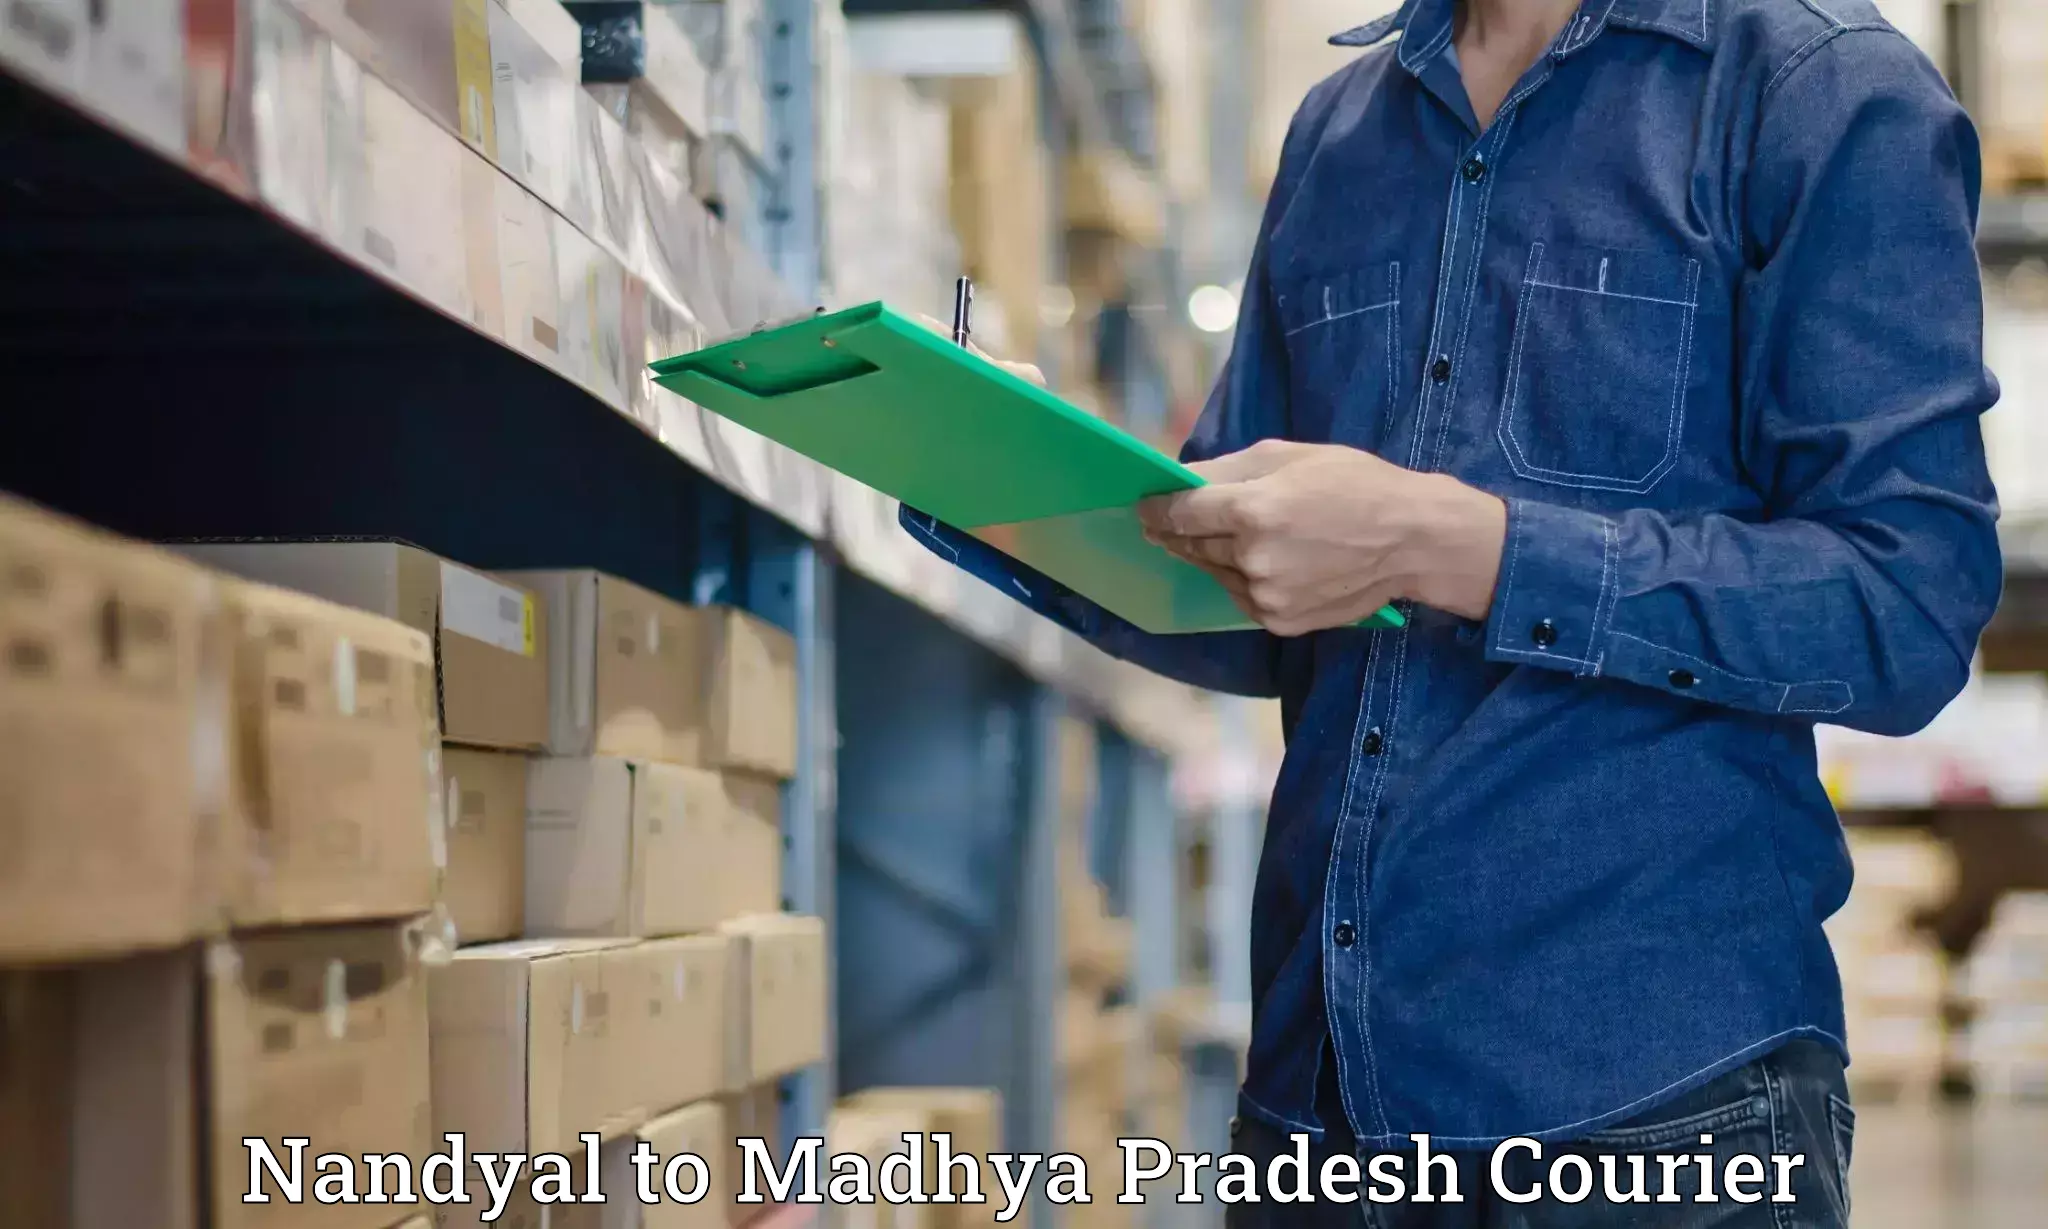 Express delivery capabilities in Nandyal to Dola